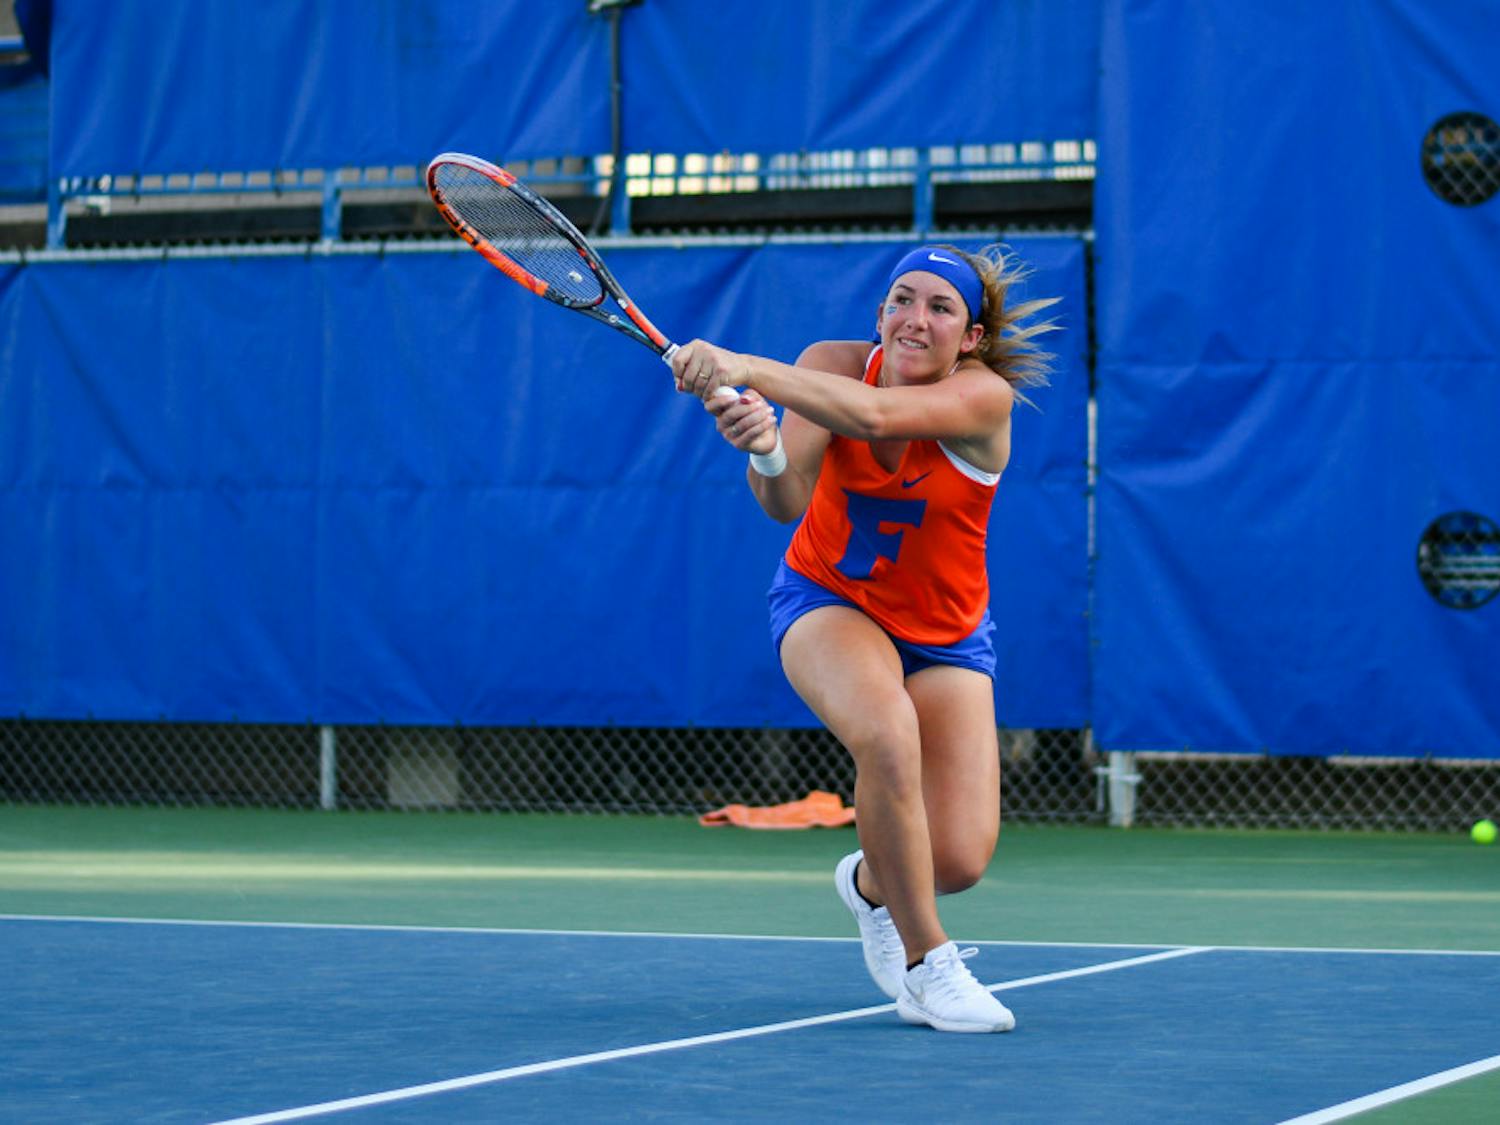 The Gators women's tennis team suffered a season-ending loss to Kansas in the second round of the NCAA Tournament on Saturday.